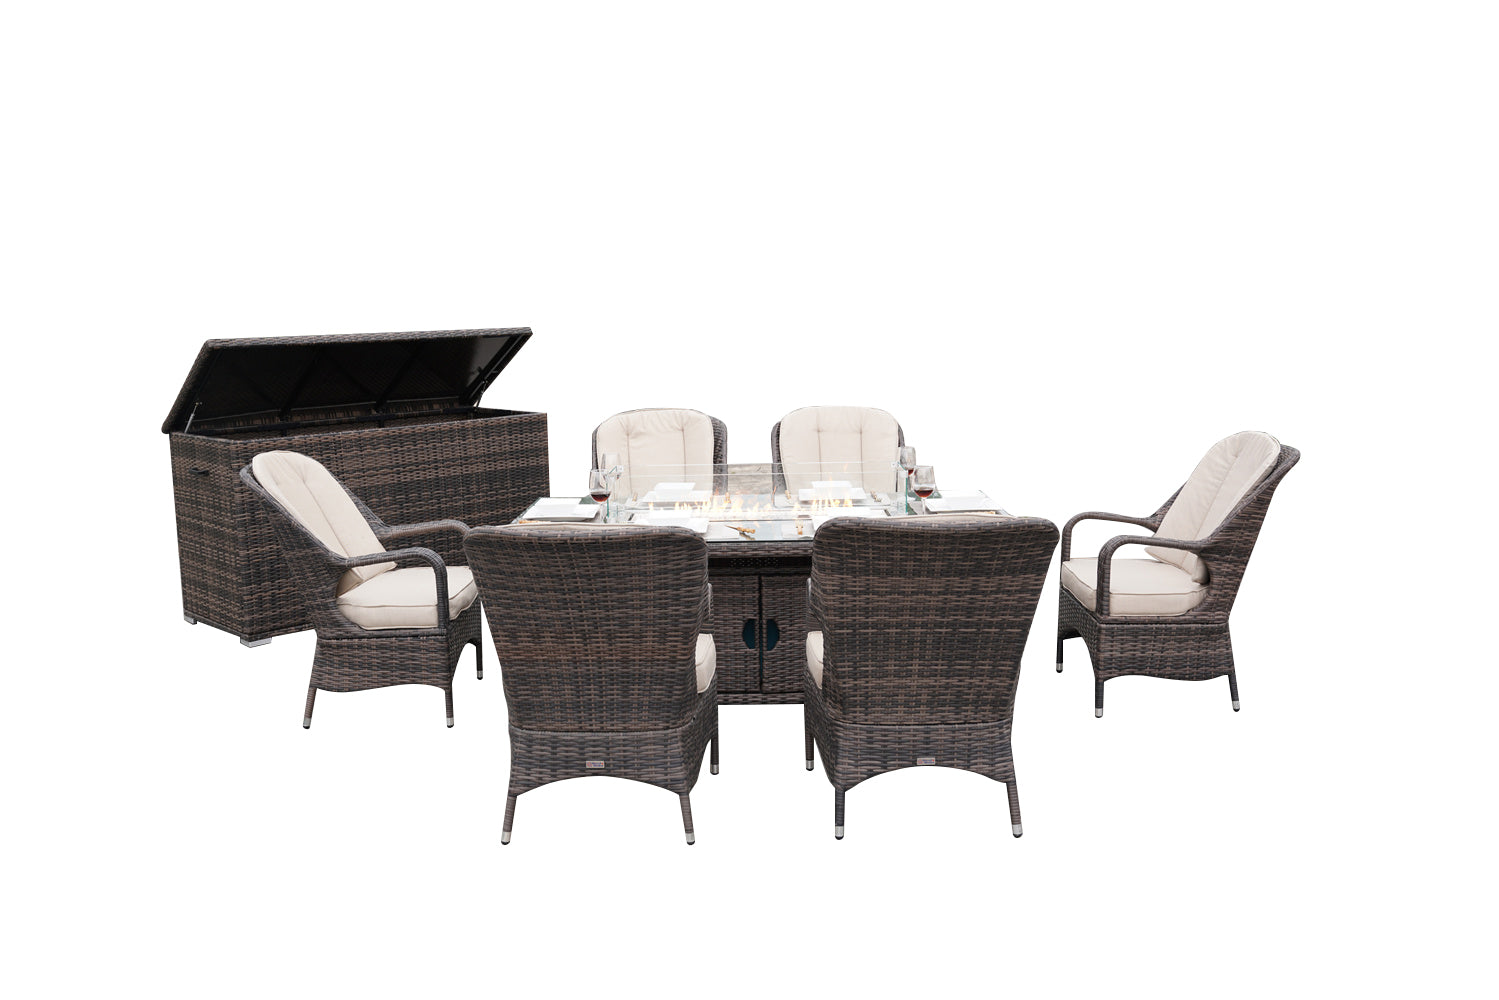 Abrihome 6 Seat Rectangular Fire Pit Dining Table With Eton Chair AND Wicker Patio Storage Box